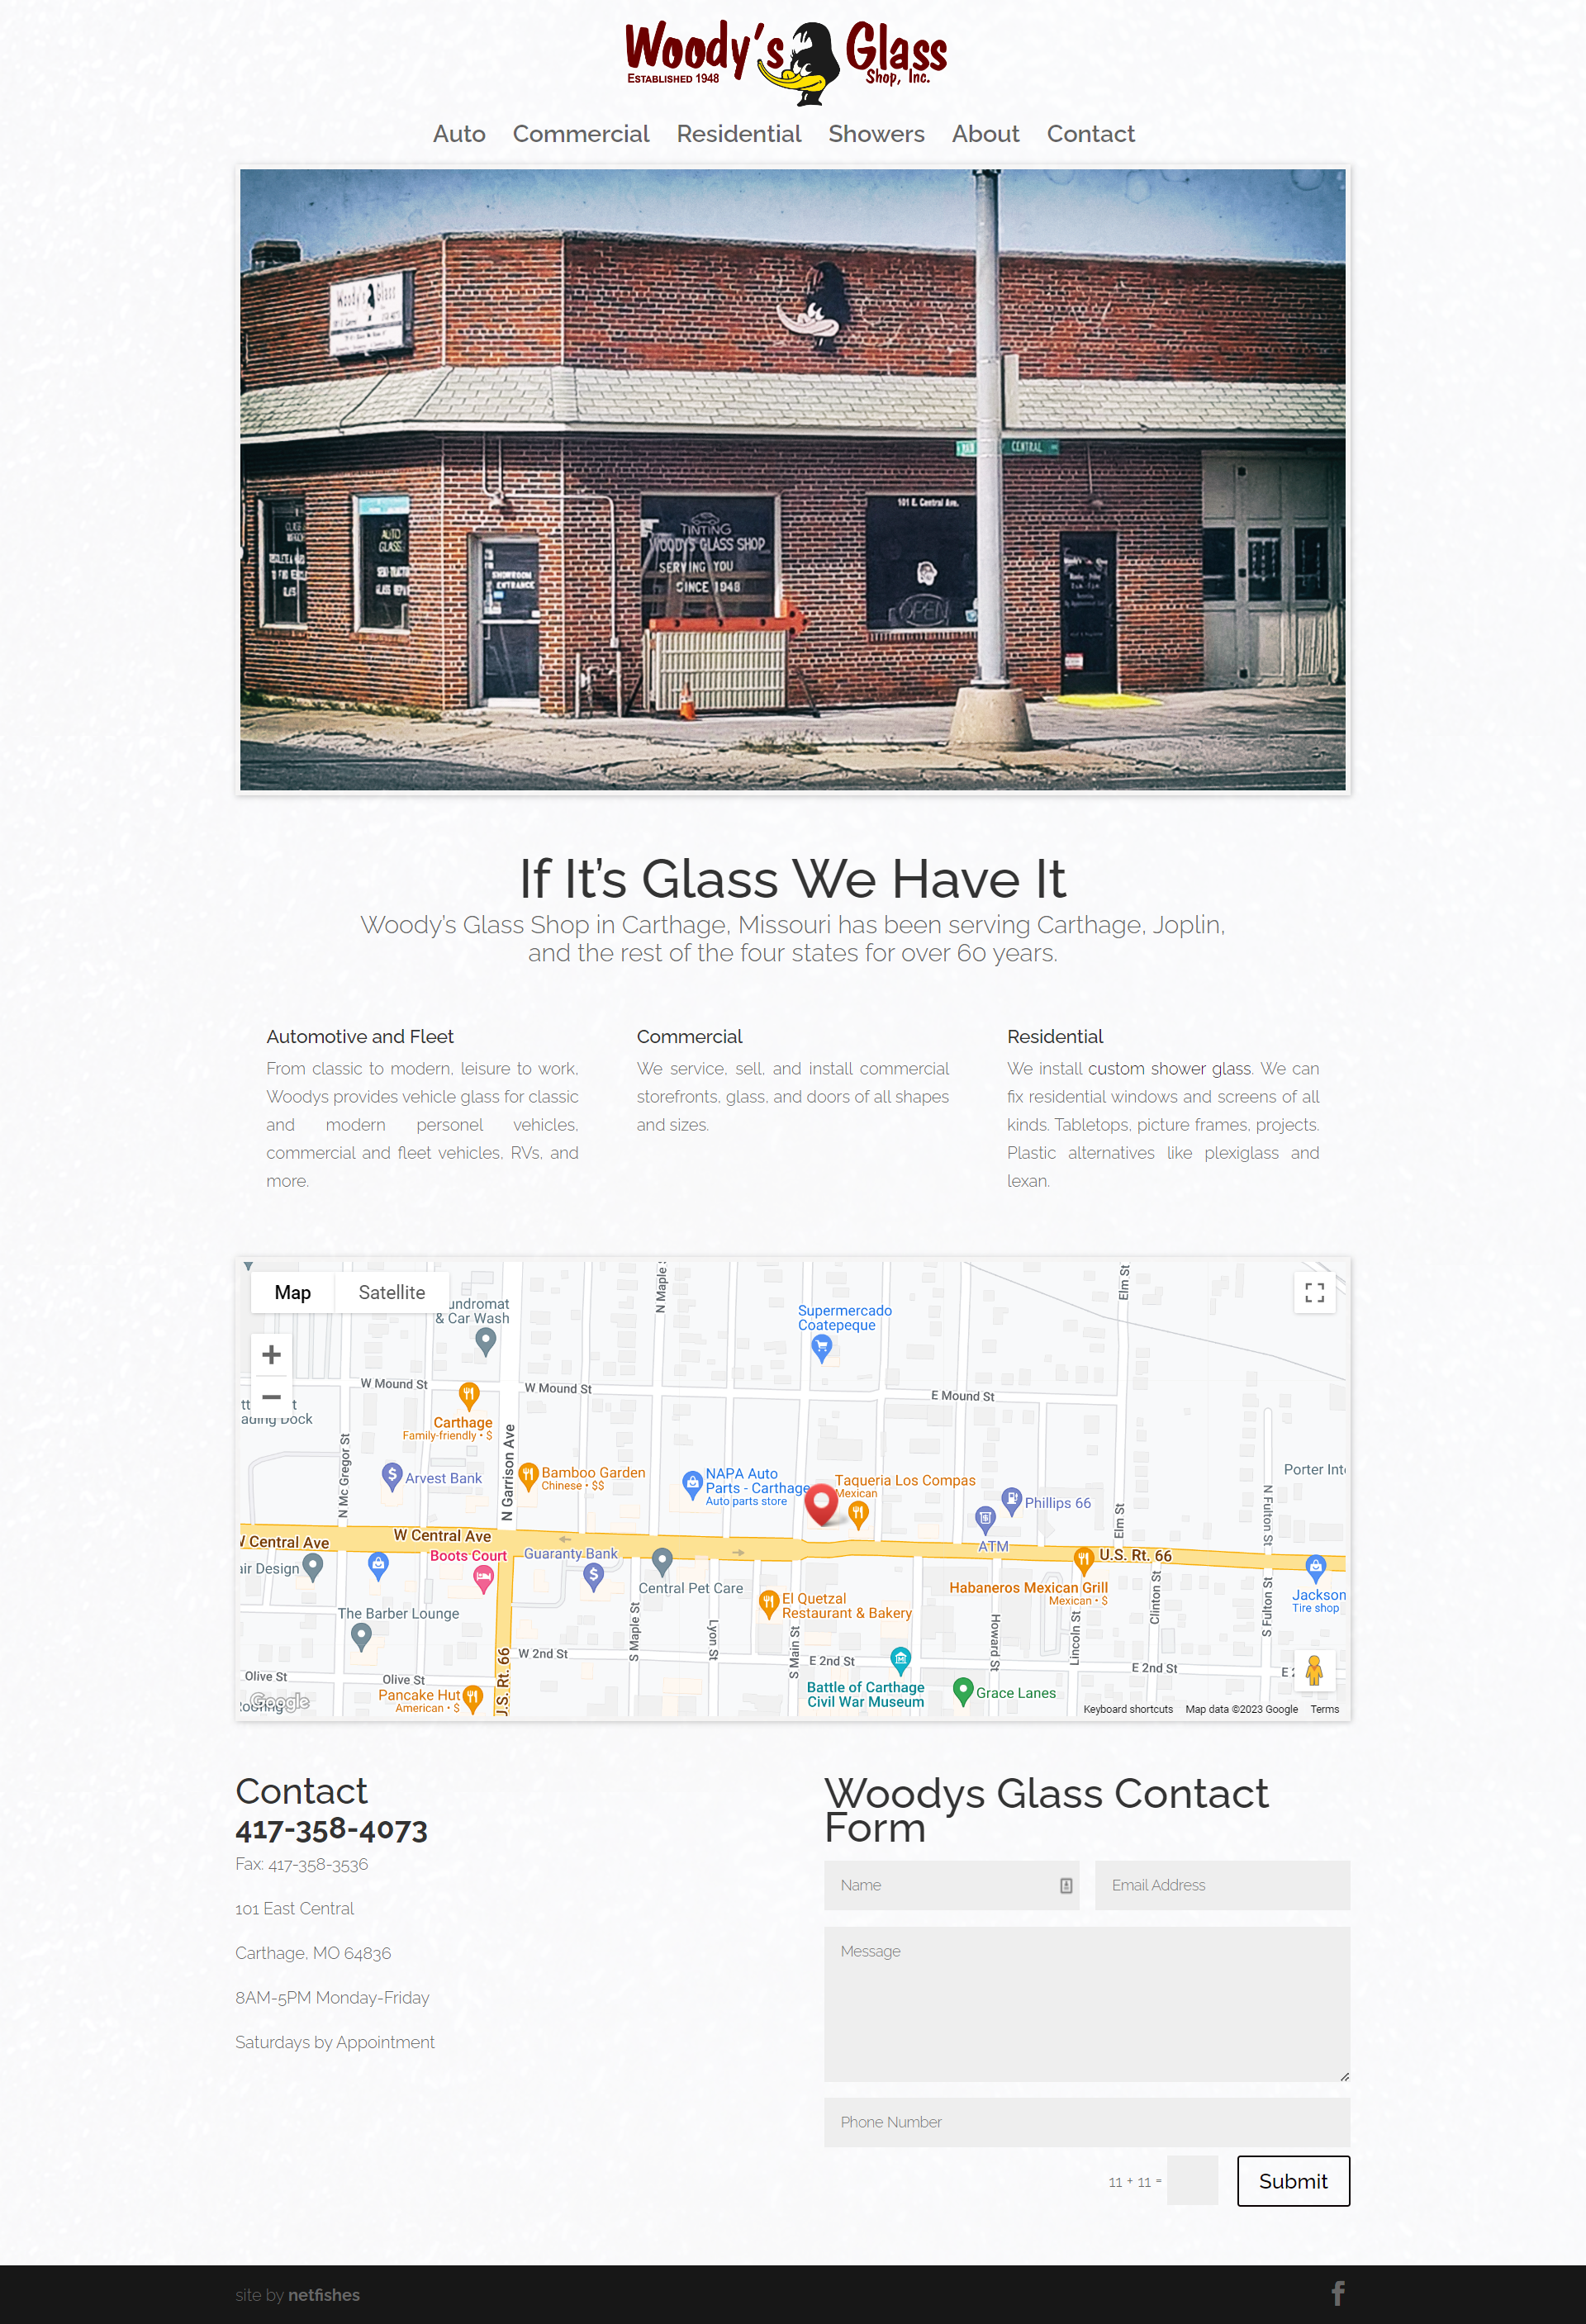 https://woodys.glass home page for Woody's Glass in Carthage, MO